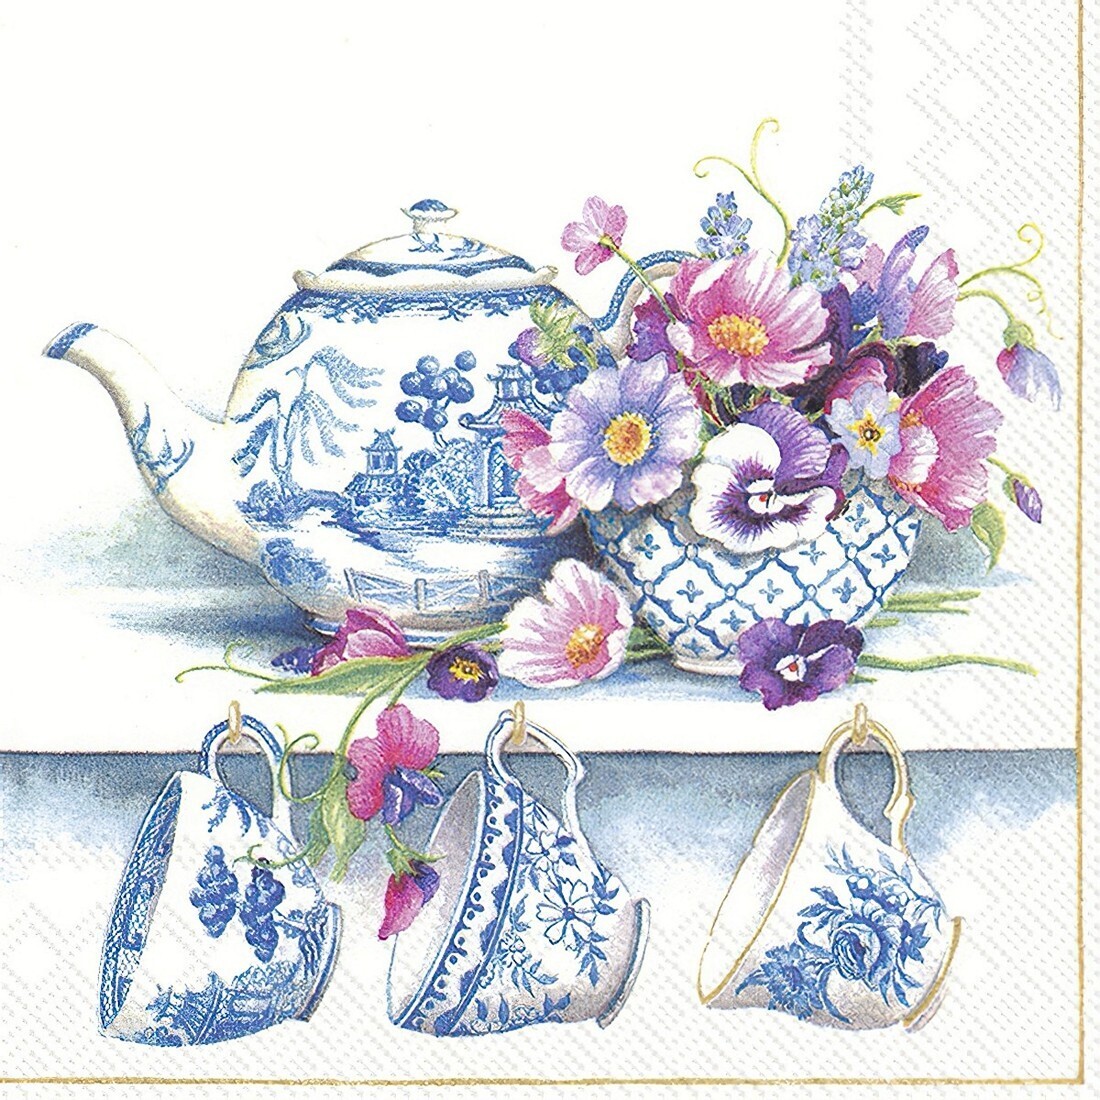 Decoupage Paper Napkins - Food & Drinks - Fine Bone China (1 Sheet) Out of Stock